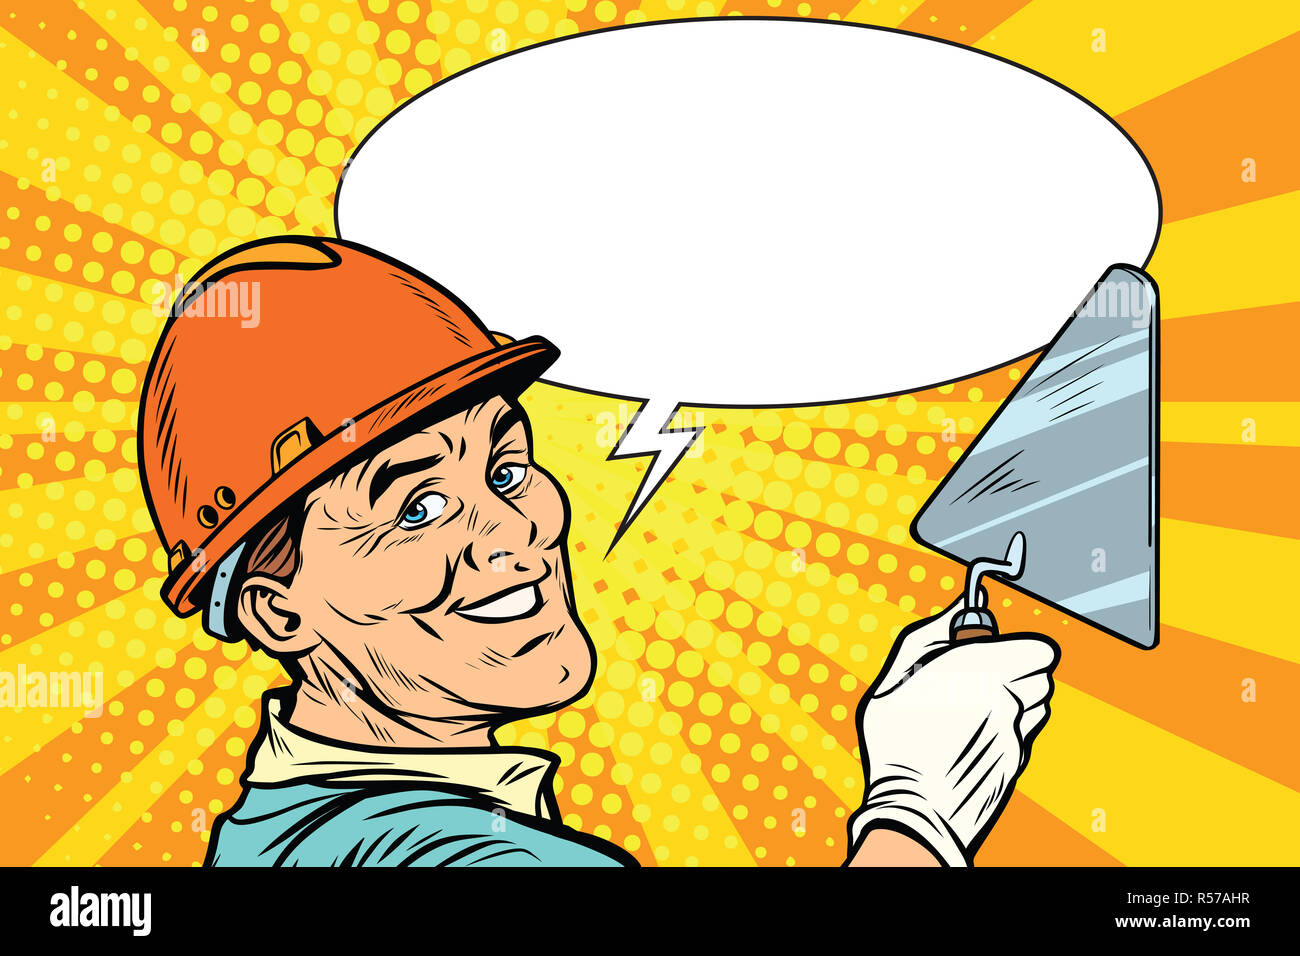 Builder repairman with the tool trowel Stock Photo